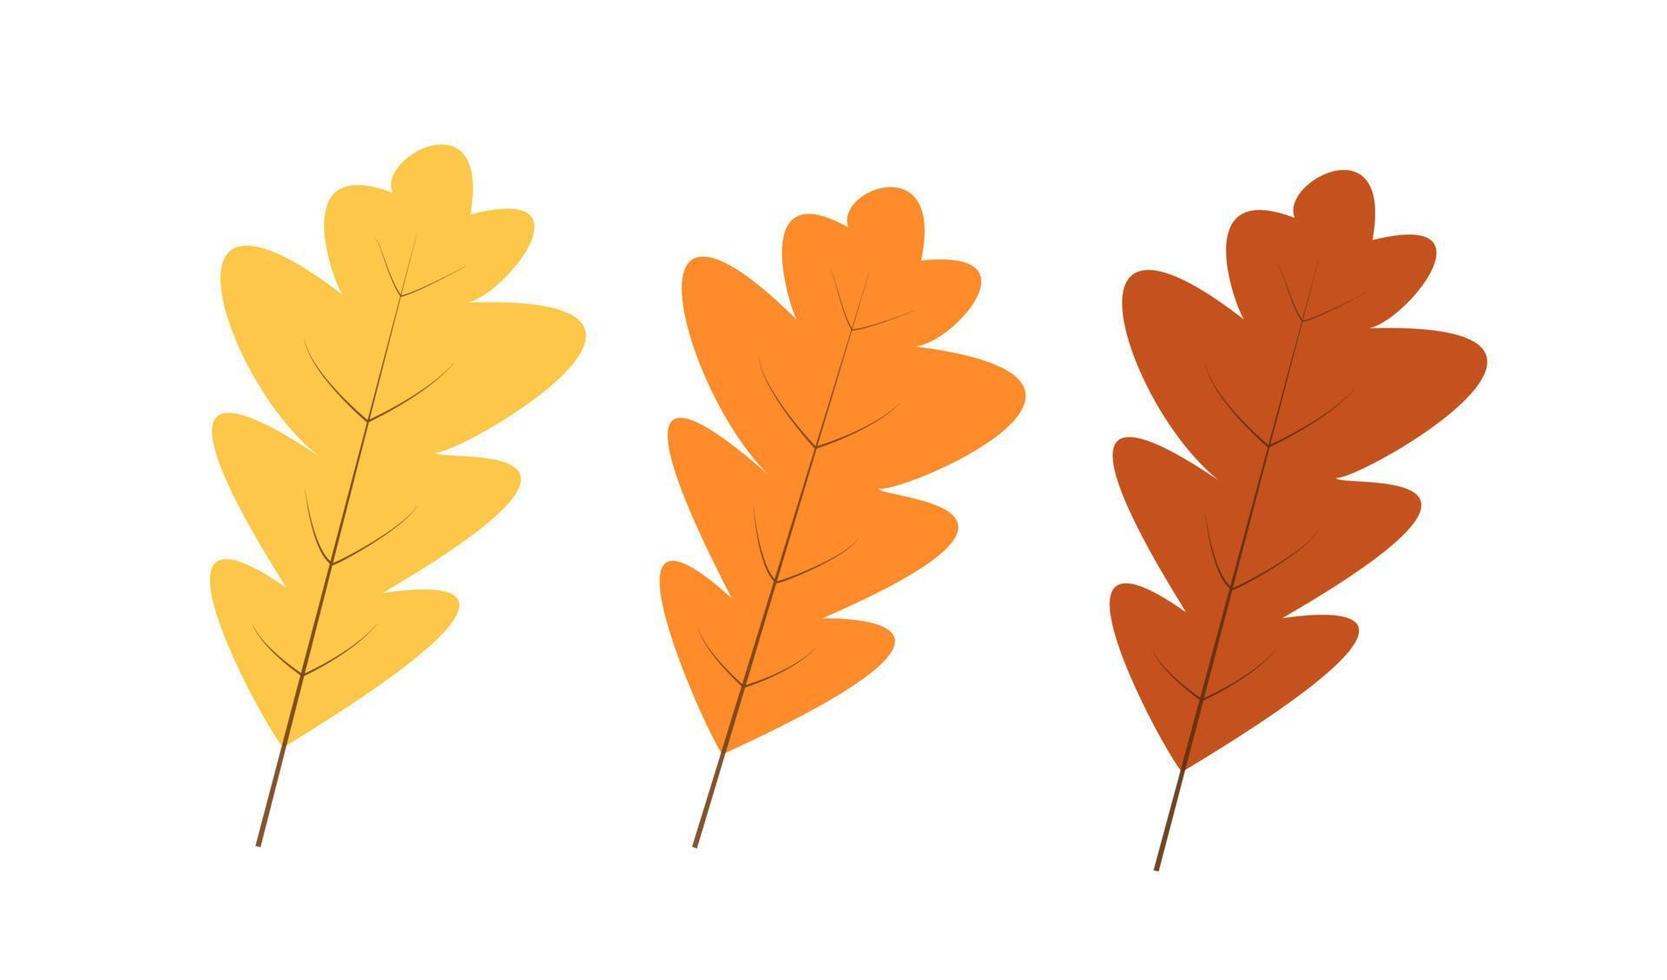 Autumn yellow and brown oak leaves isolated on white, vector illustration of autumn leaf fall